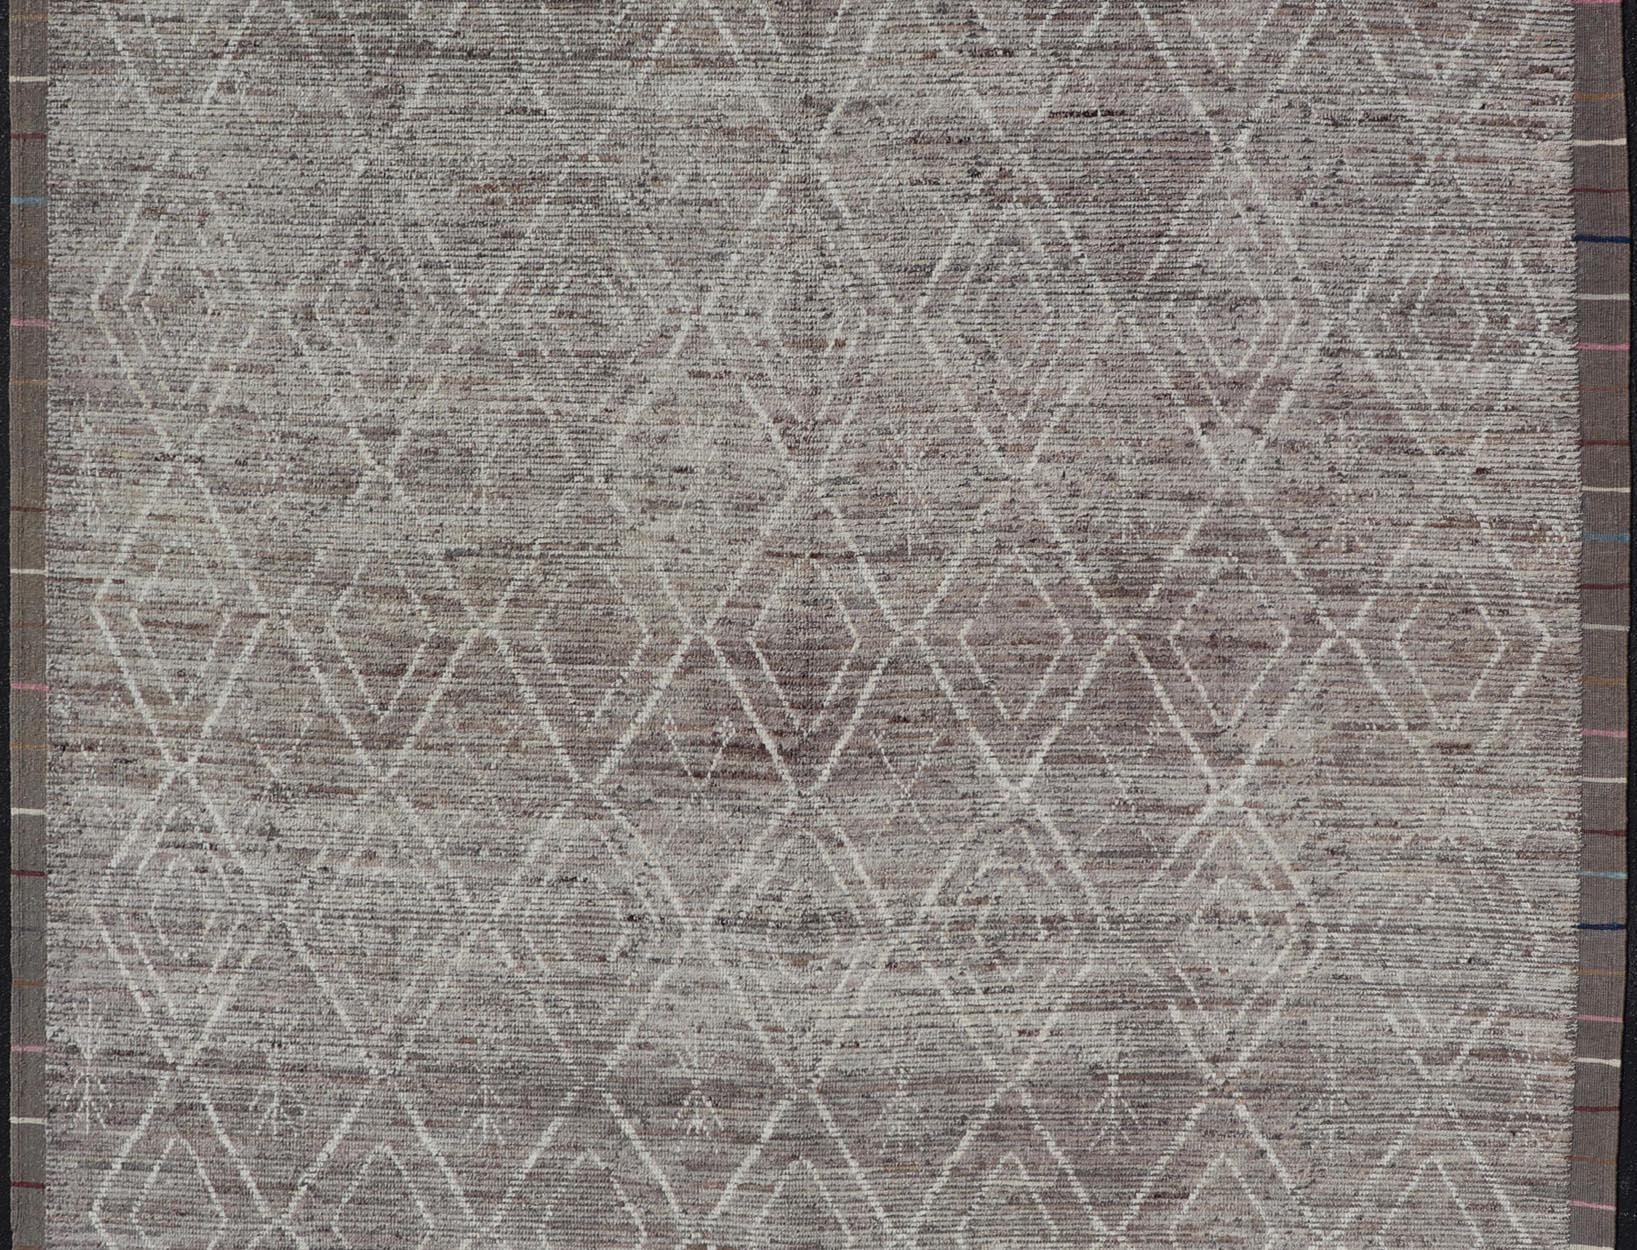 Modern Causal Contemporary Rug in Moroccan Design in Variegated Gray and Cream In Excellent Condition For Sale In Atlanta, GA